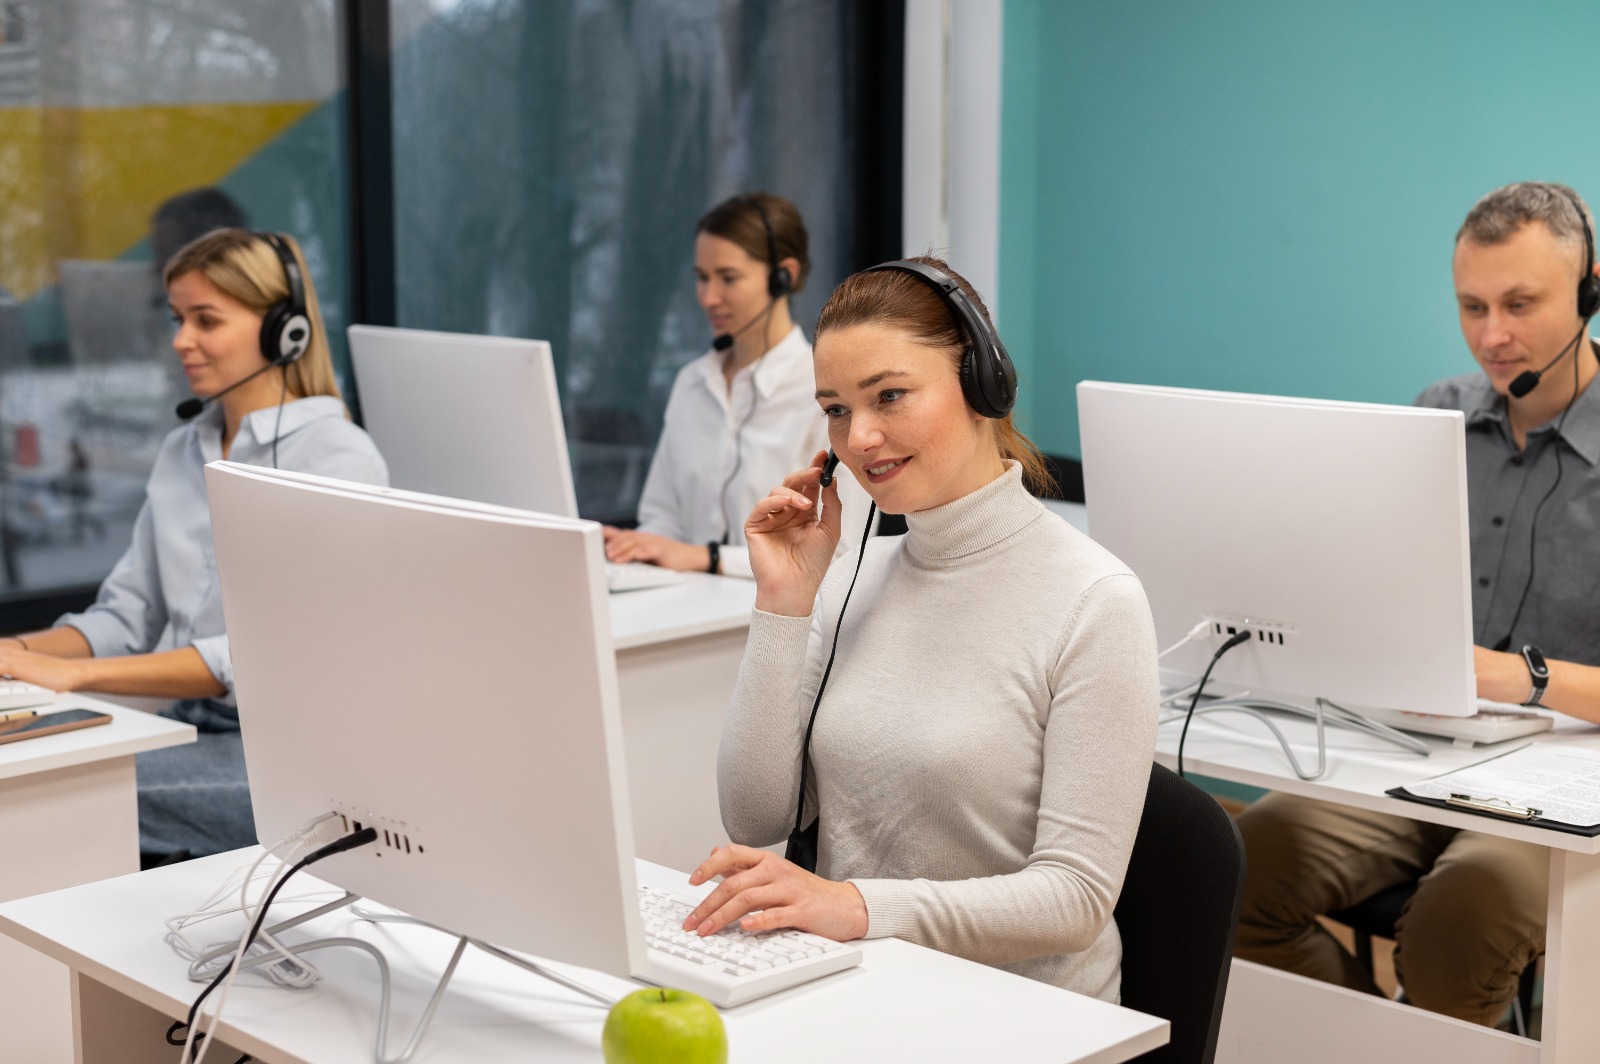 5 Ways to Improve Your Contact Center Operations